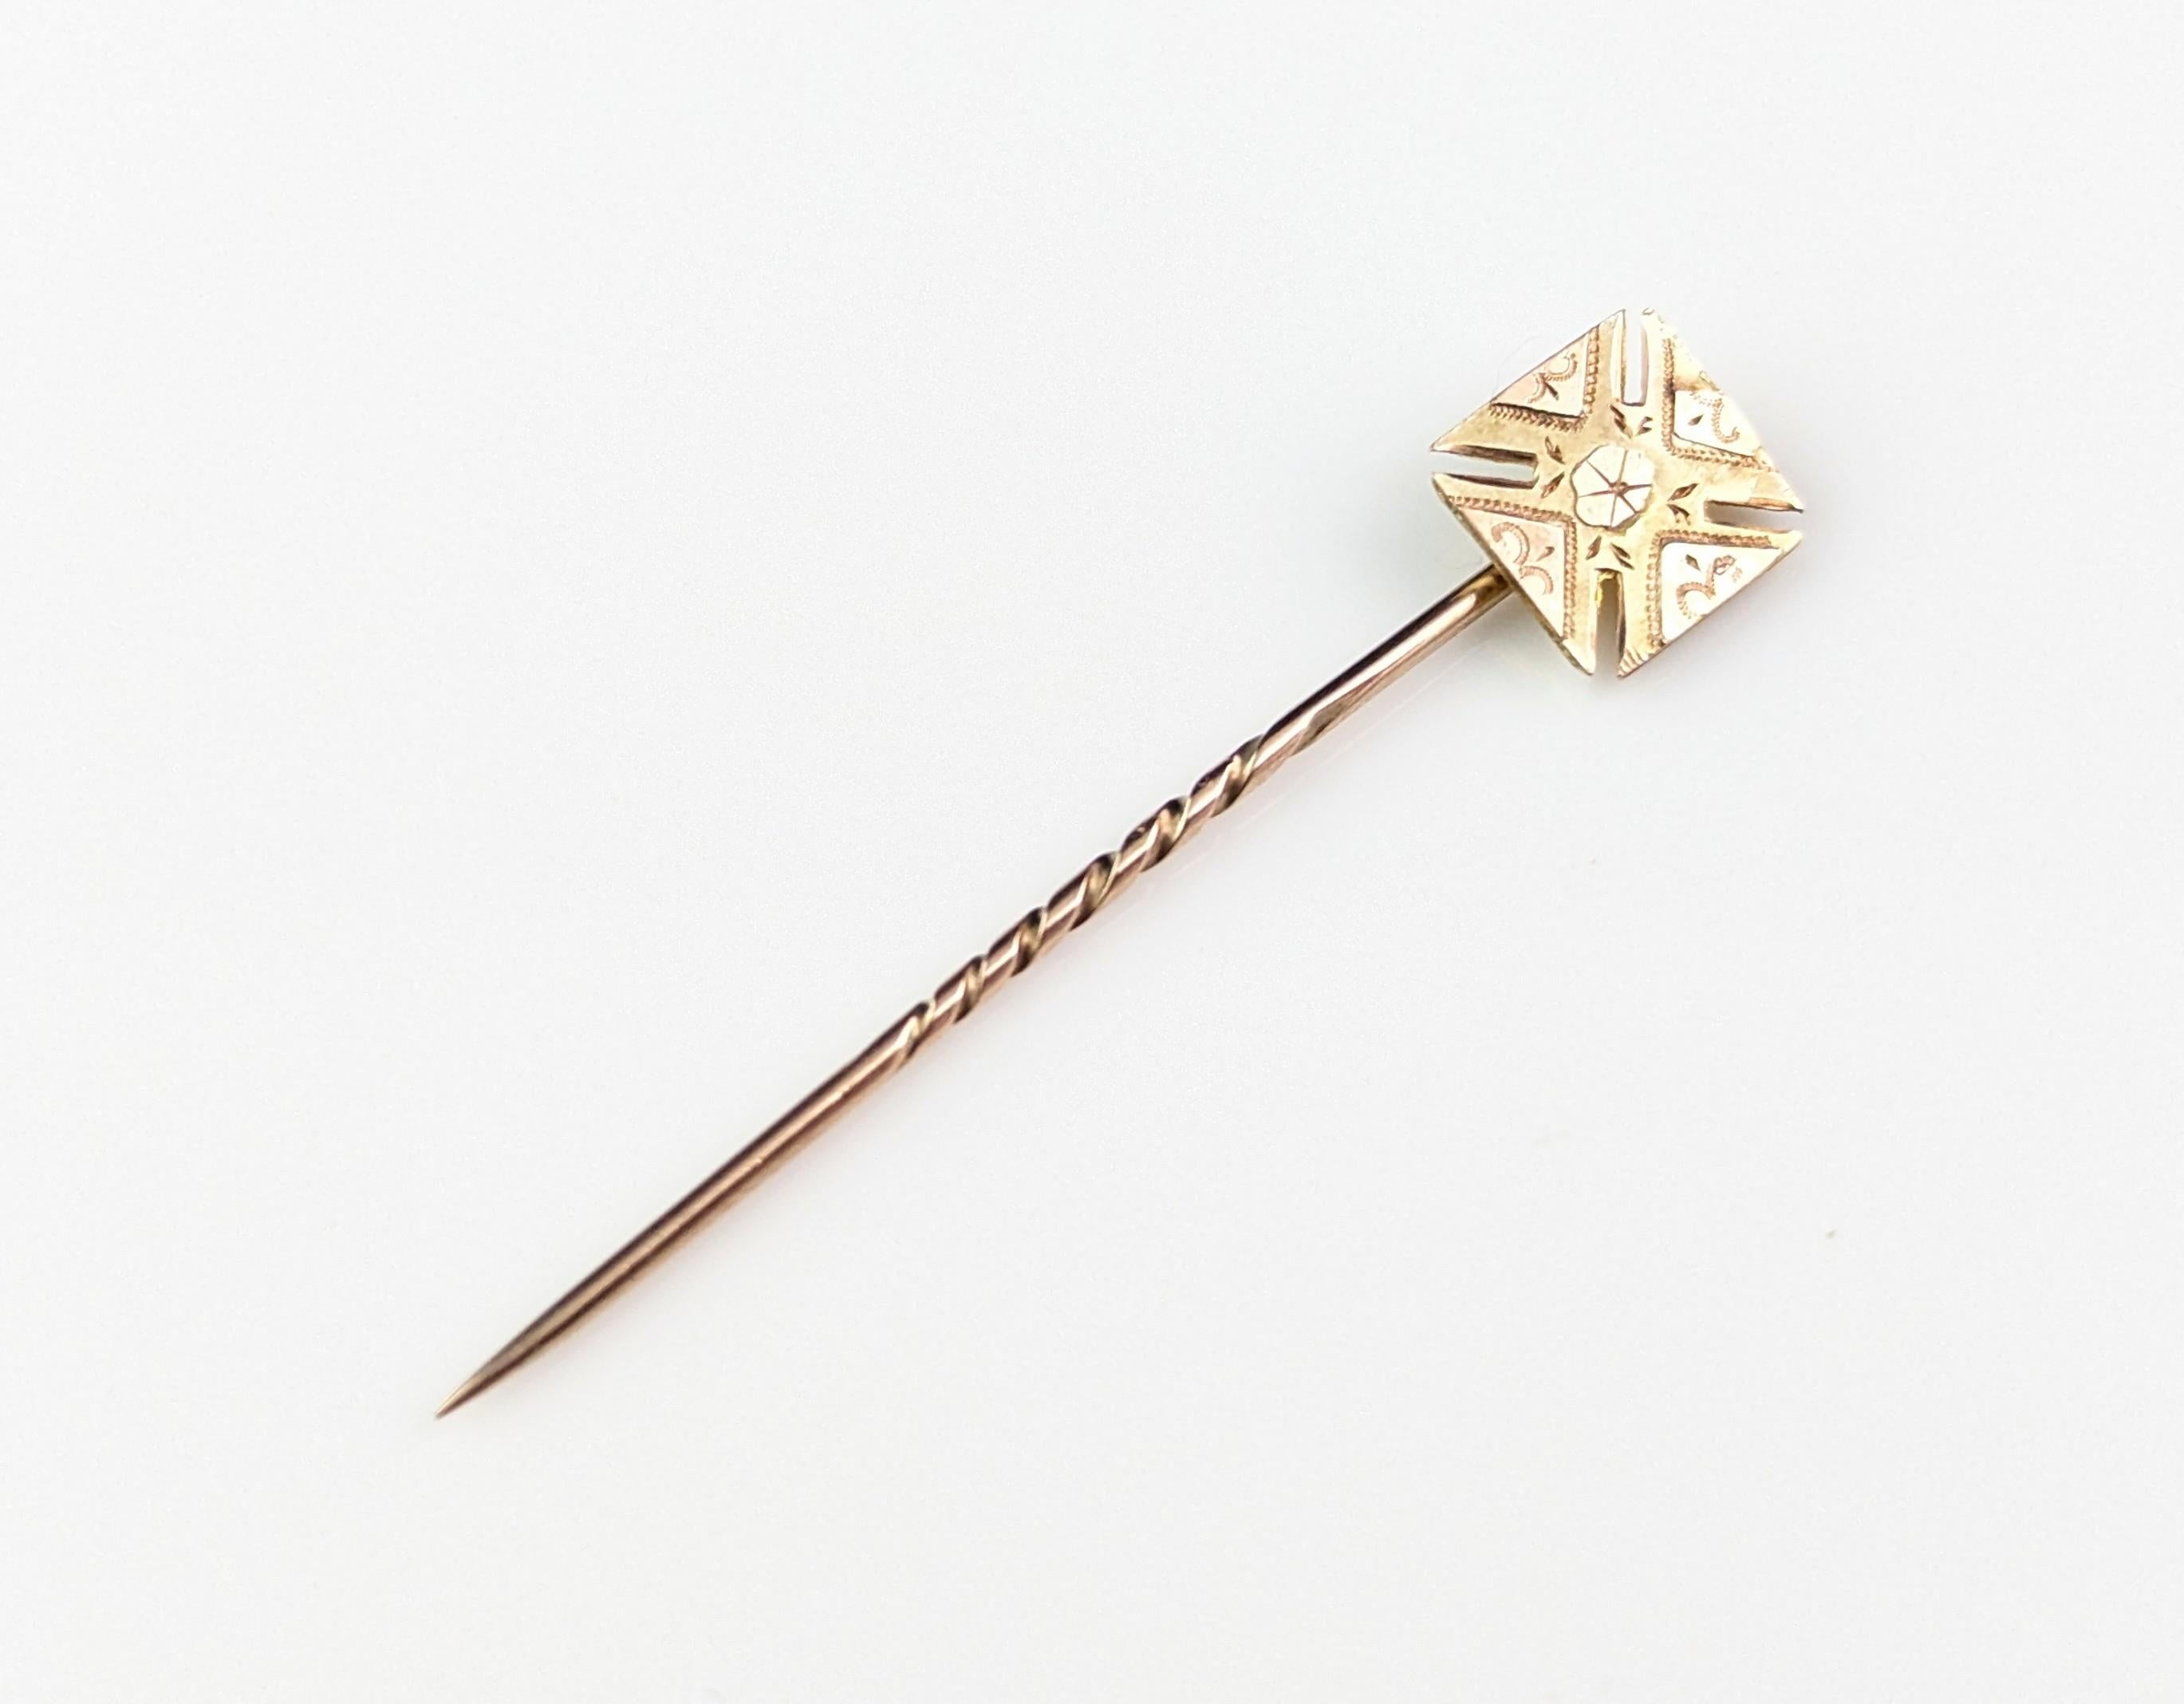 Vintage Art Deco 9k gold stick pin, Cross Pattee  For Sale 7